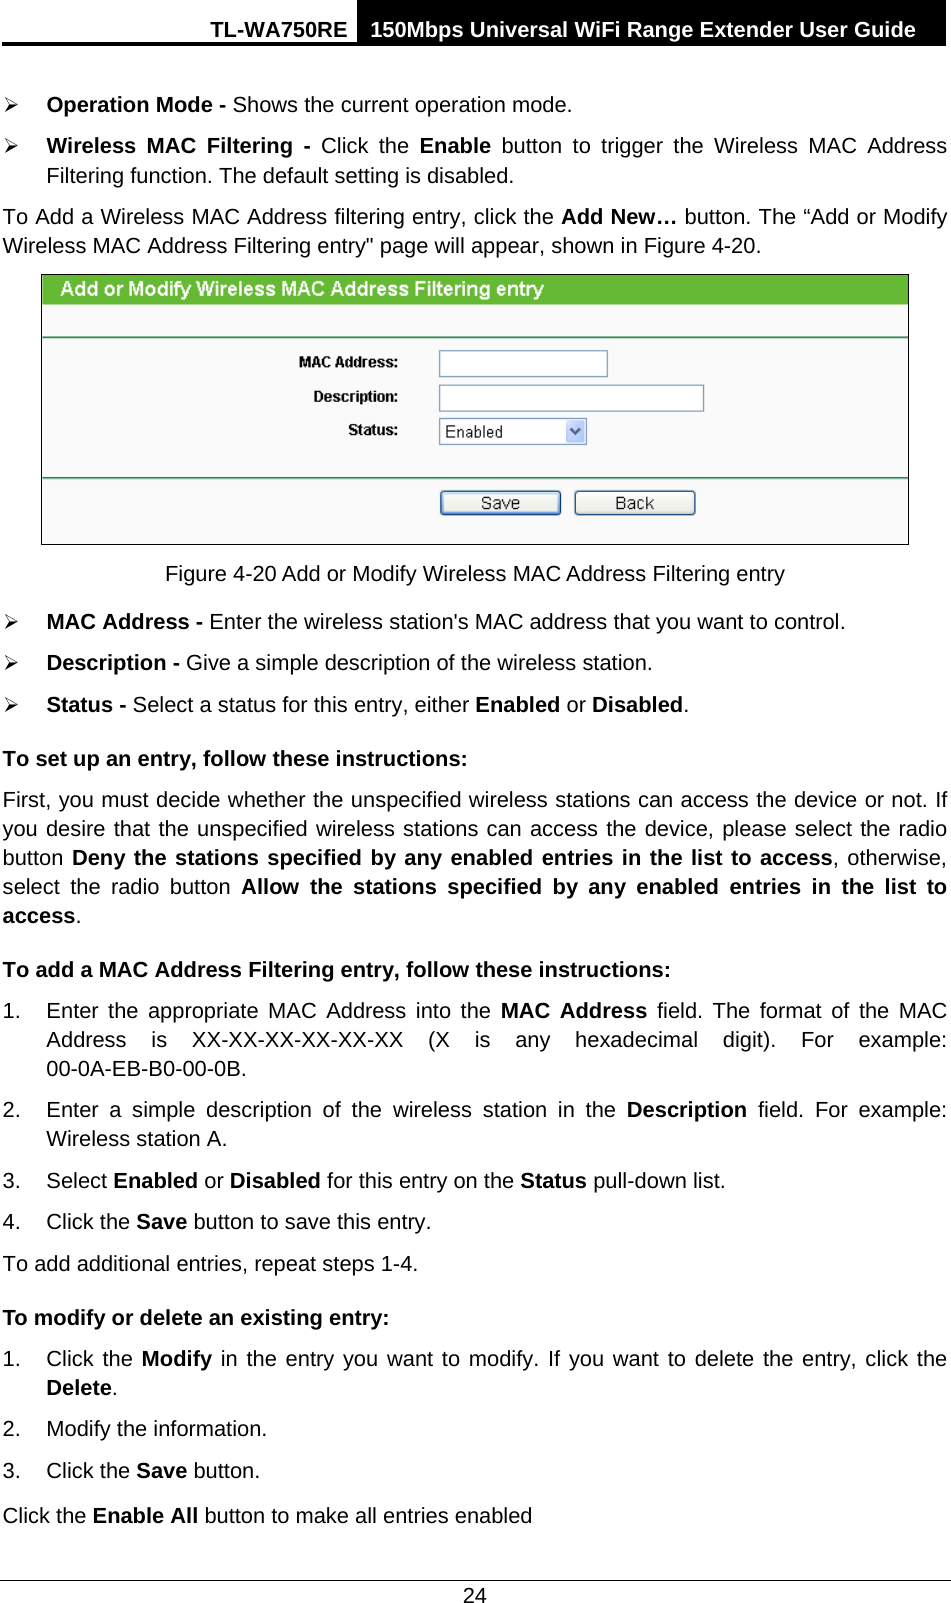 TL-WA750RE 150Mbps Universal WiFi Range Extender User Guide  24  Operation Mode - Shows the current operation mode.  Wireless MAC Filtering  - Click the Enable button to trigger the Wireless MAC Address Filtering function. The default setting is disabled. To Add a Wireless MAC Address filtering entry, click the Add New… button. The “Add or Modify Wireless MAC Address Filtering entry&quot; page will appear, shown in Figure 4-20.  Figure 4-20 Add or Modify Wireless MAC Address Filtering entry  MAC Address - Enter the wireless station&apos;s MAC address that you want to control.    Description - Give a simple description of the wireless station.    Status - Select a status for this entry, either Enabled or Disabled. To set up an entry, follow these instructions:   First, you must decide whether the unspecified wireless stations can access the device or not. If you desire that the unspecified wireless stations can access the device, please select the radio button Deny the stations specified by any enabled entries in the list to access, otherwise, select the radio button  Allow the stations specified by any enabled entries in the list to access. To add a MAC Address Filtering entry, follow these instructions: 1. Enter the appropriate MAC Address into the MAC Address field. The format of the MAC Address is XX-XX-XX-XX-XX-XX (X is any hexadecimal digit). For example: 00-0A-EB-B0-00-0B.   2. Enter a simple description of the wireless station in the Description field. For example: Wireless station A. 3. Select Enabled or Disabled for this entry on the Status pull-down list. 4. Click the Save button to save this entry. To add additional entries, repeat steps 1-4. To modify or delete an existing entry: 1. Click the Modify in the entry you want to modify. If you want to delete the entry, click the Delete. 2. Modify the information.   3. Click the Save button. Click the Enable All button to make all entries enabled 